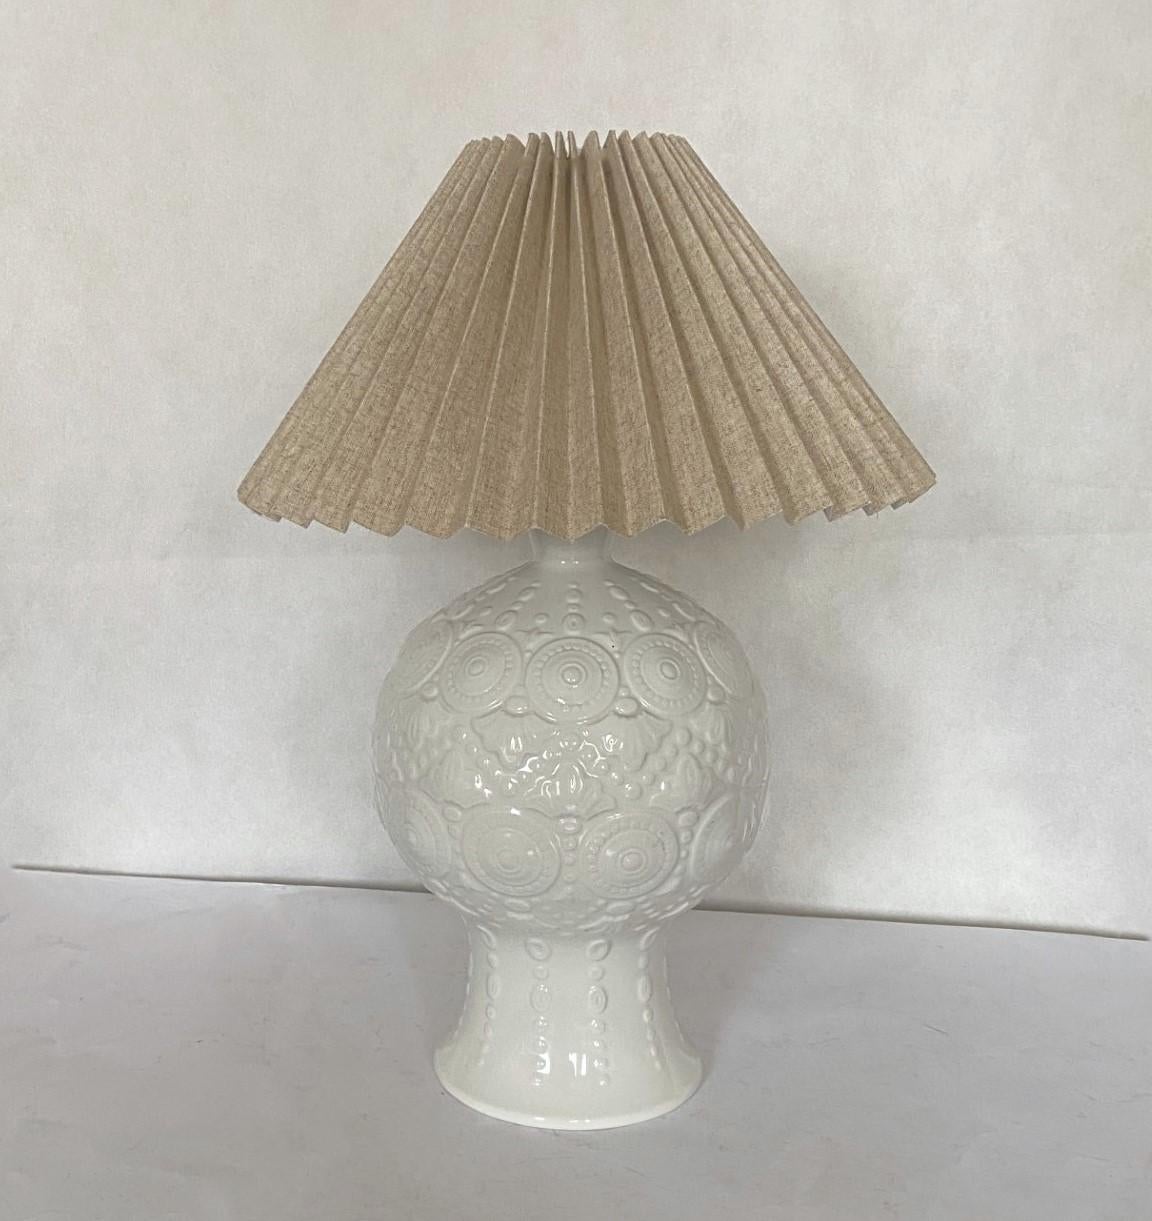 A wundelful hand-crafted white ceramic vase table lamp, textured high-relief and glazed, with a linen plissee  shade,marked on the base, Spain, 1970s. In very good vintage condition, no damages, with new conical off-white shade. Switch to turn on